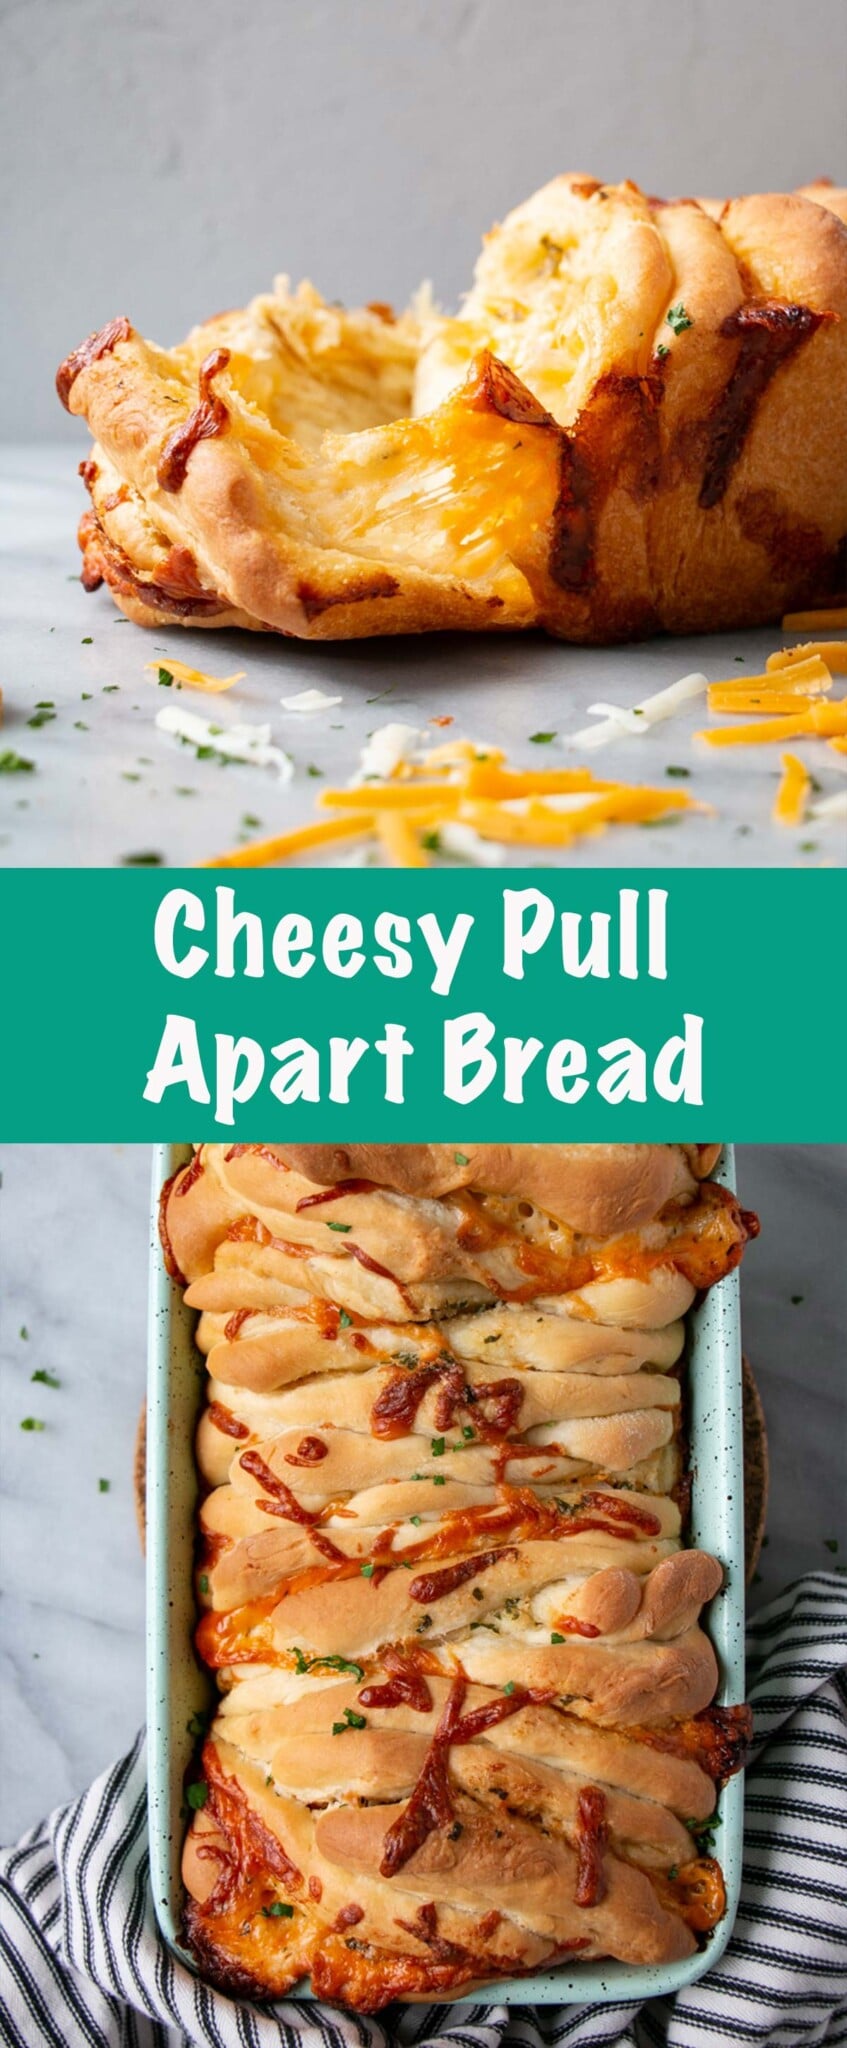 This soft and fluffy Pull Apart Bread is packed with pockets of cheddar and mozzarella cheese for the ultimate cheese pull scene. #sponsored #recipe via @mykitchenlove